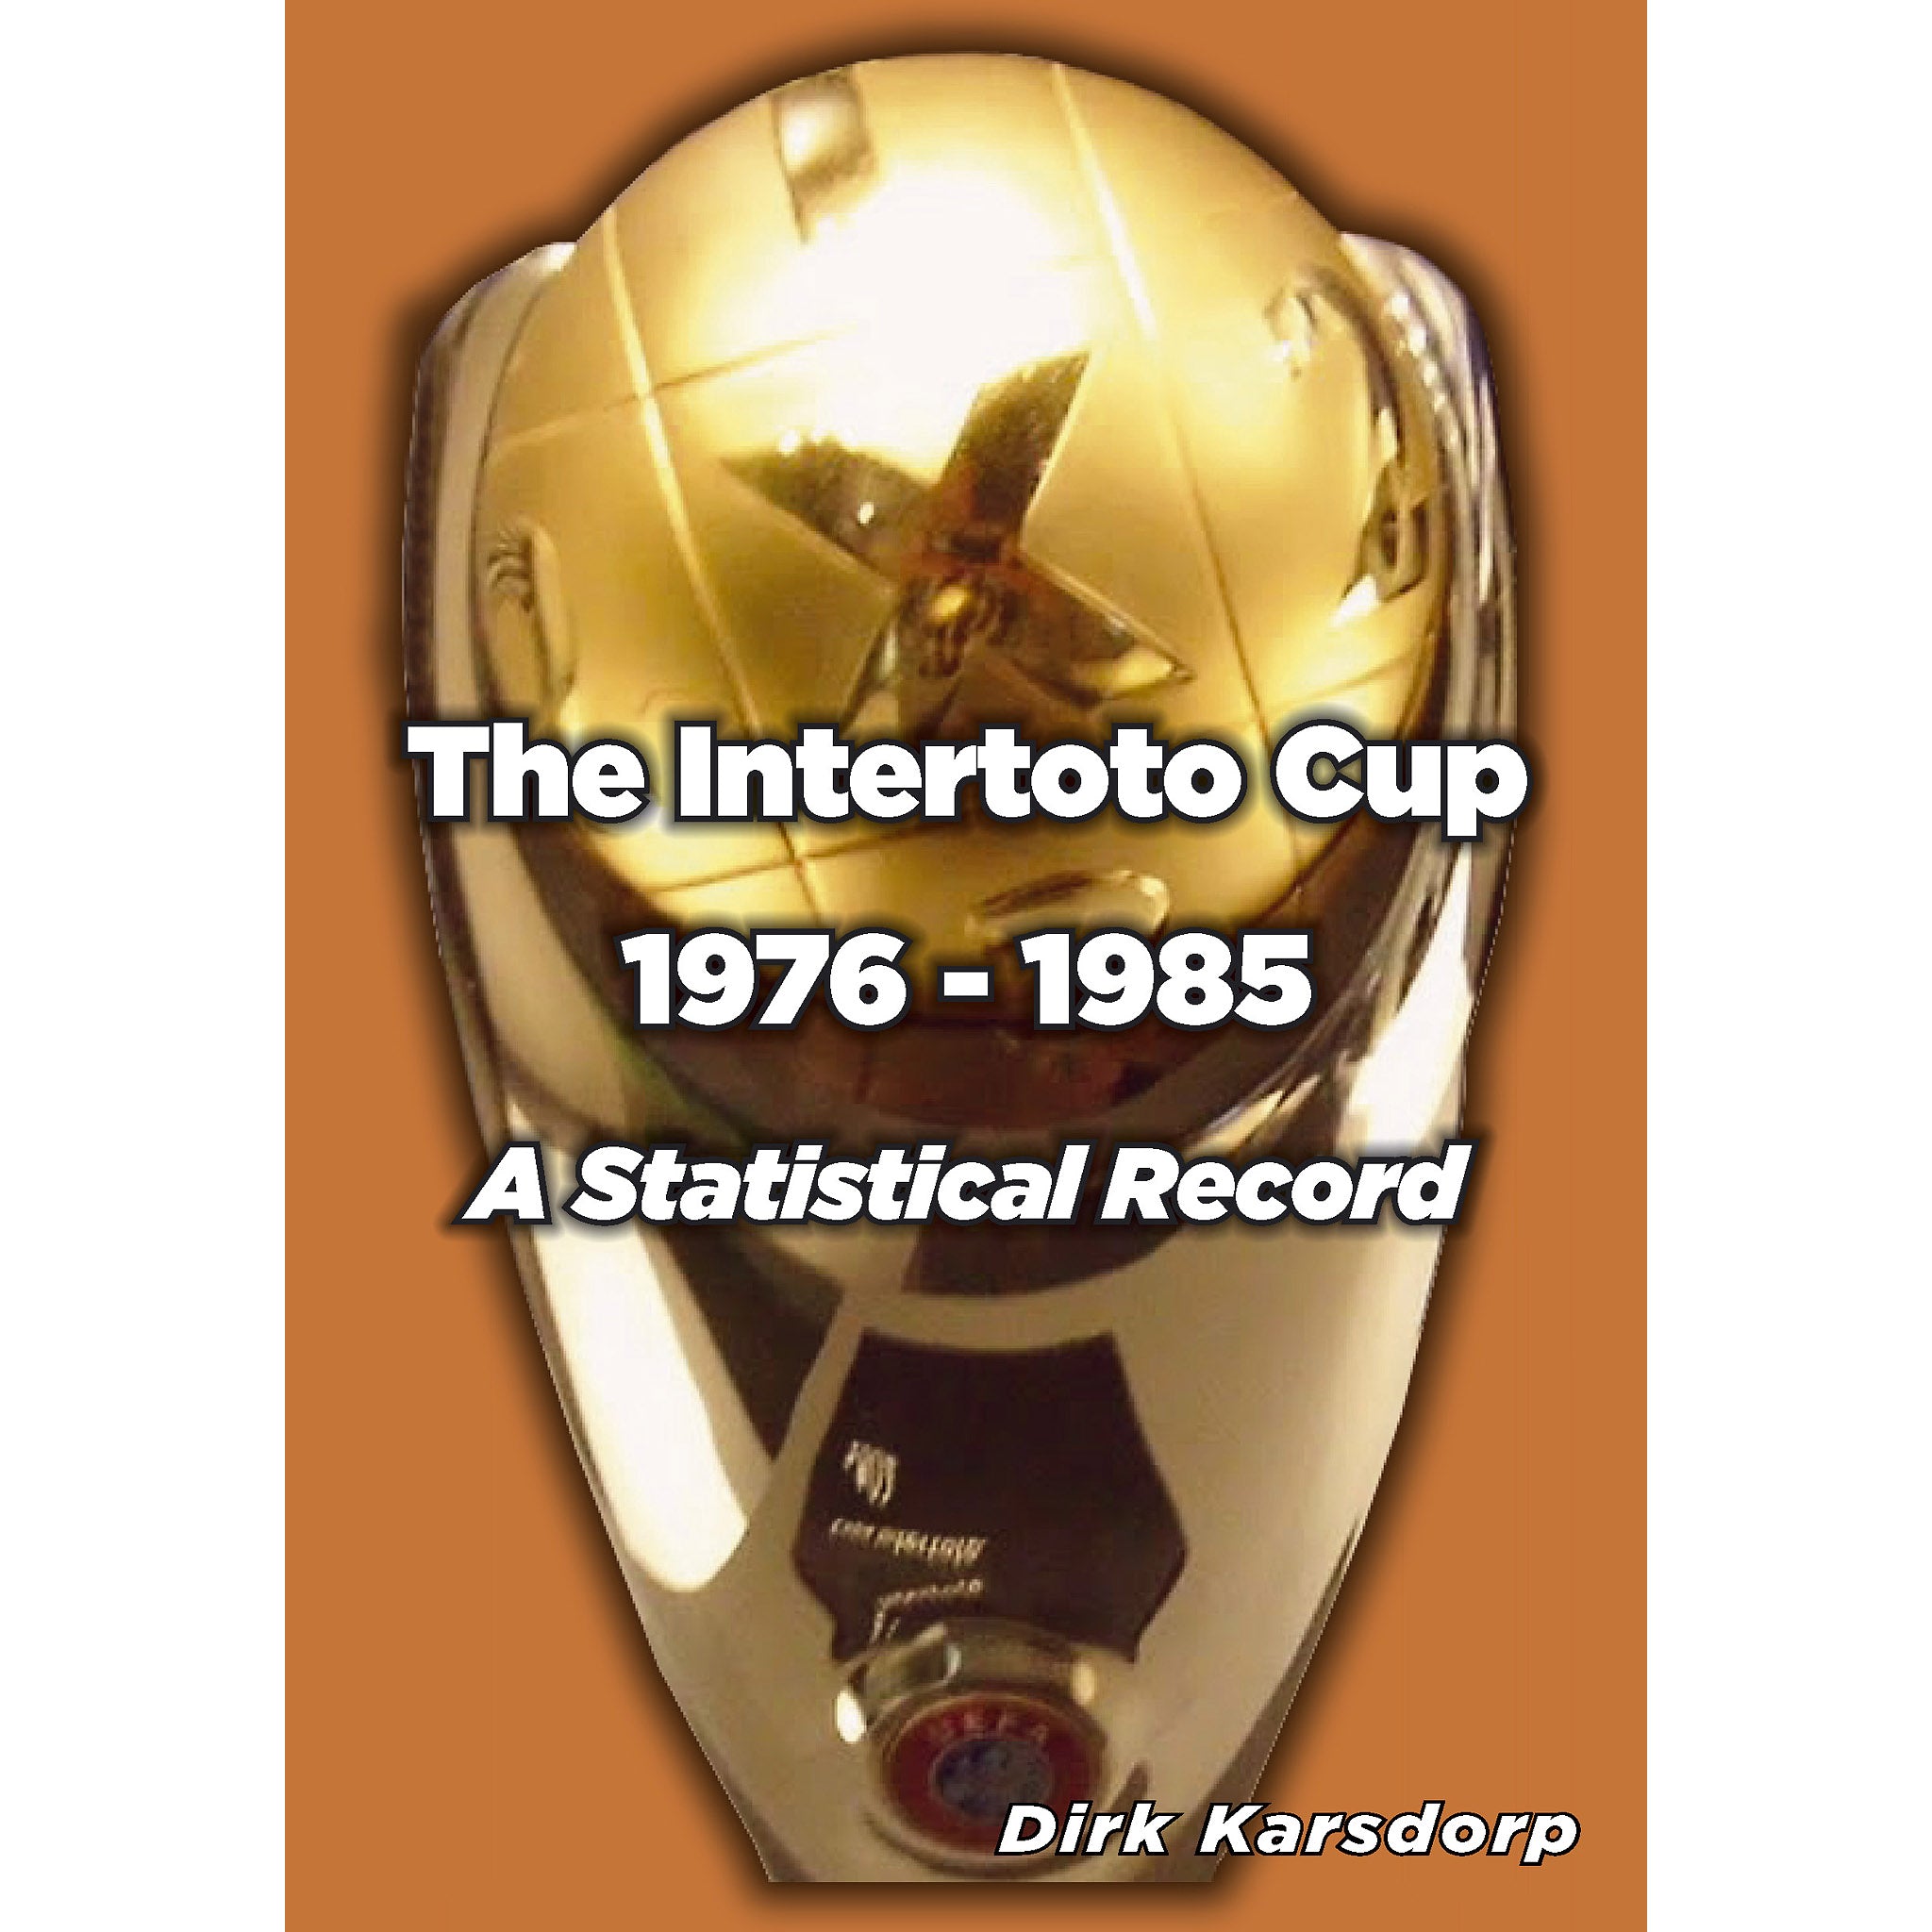 The Intertoto Cup – A Statistical Record 1976-1985